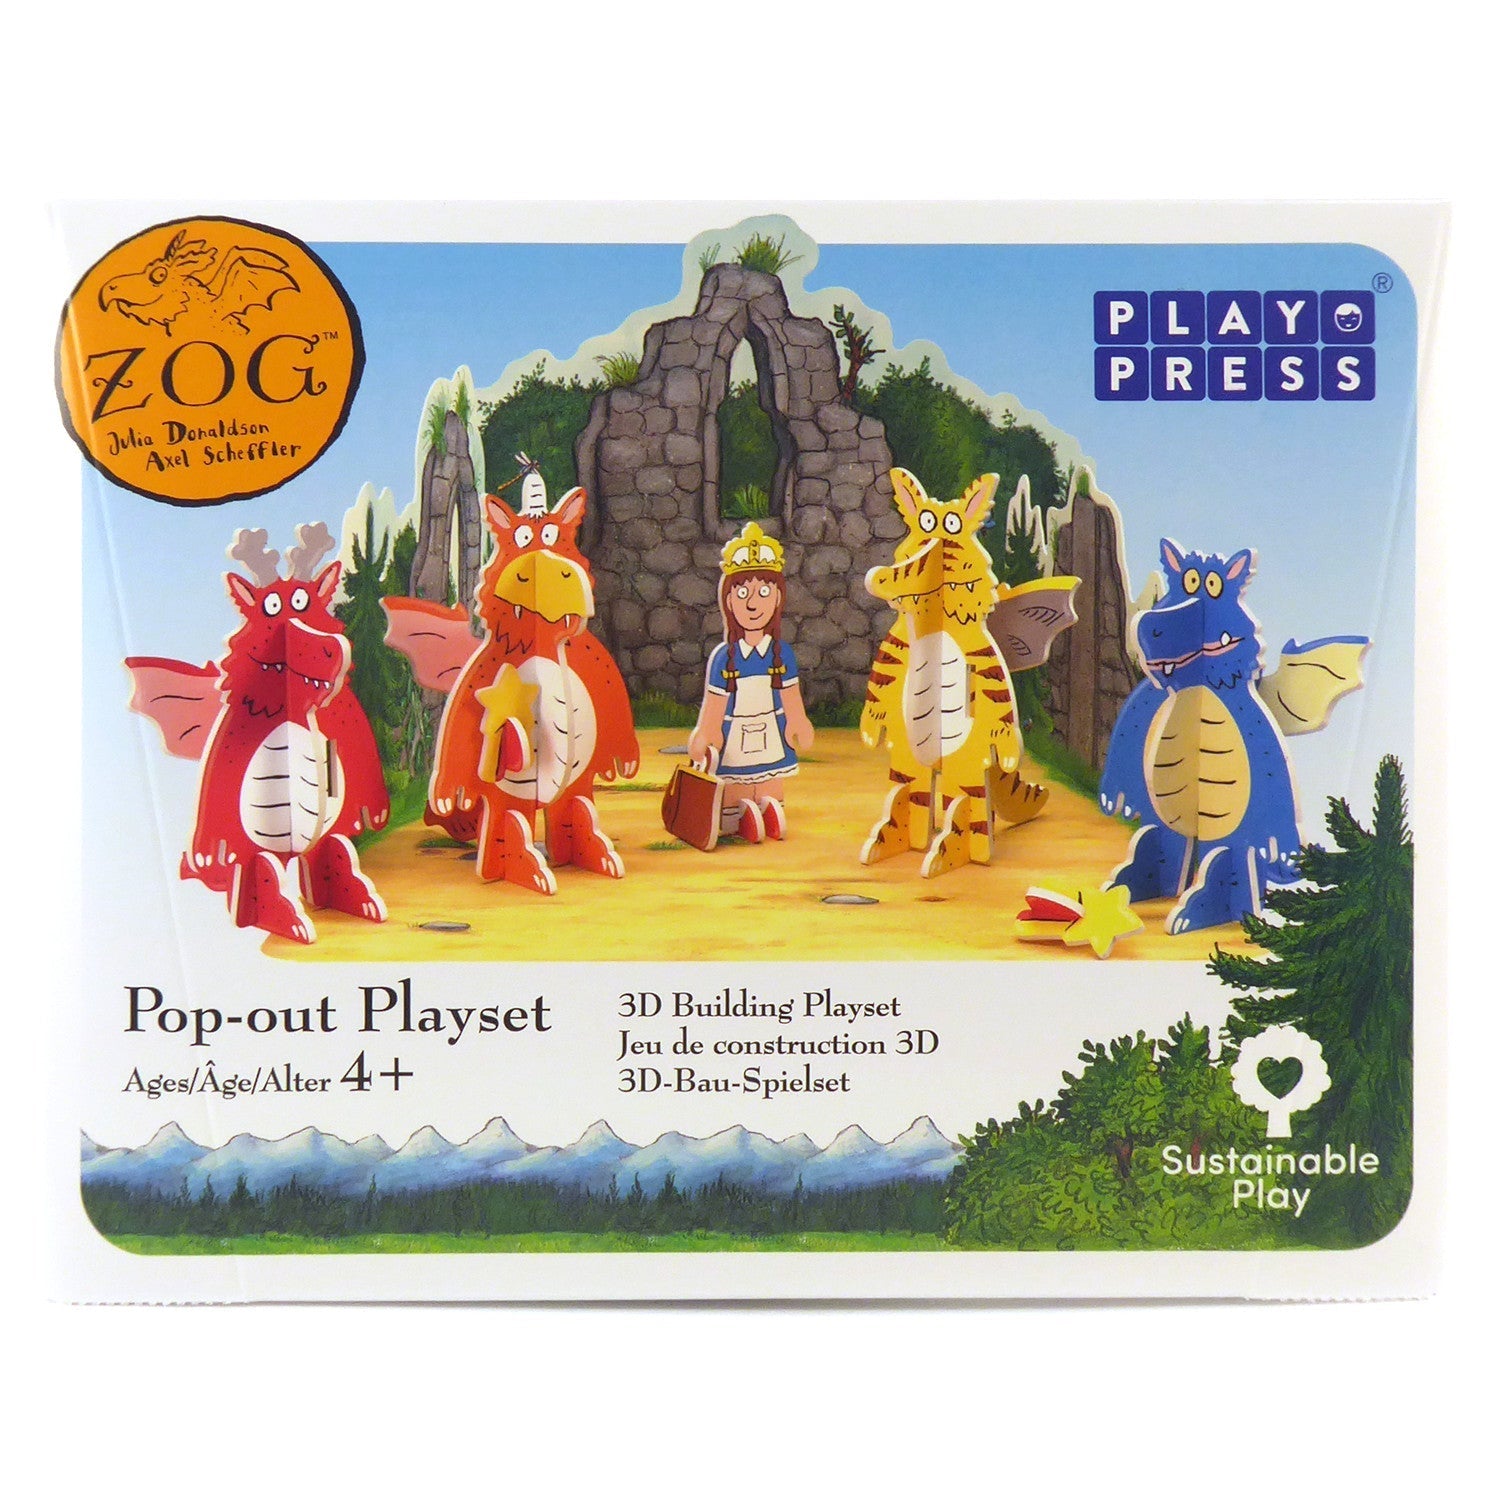 PlayPress Zog Playset - Eco-friendly and creative set for imaginative and sustainable storytelling